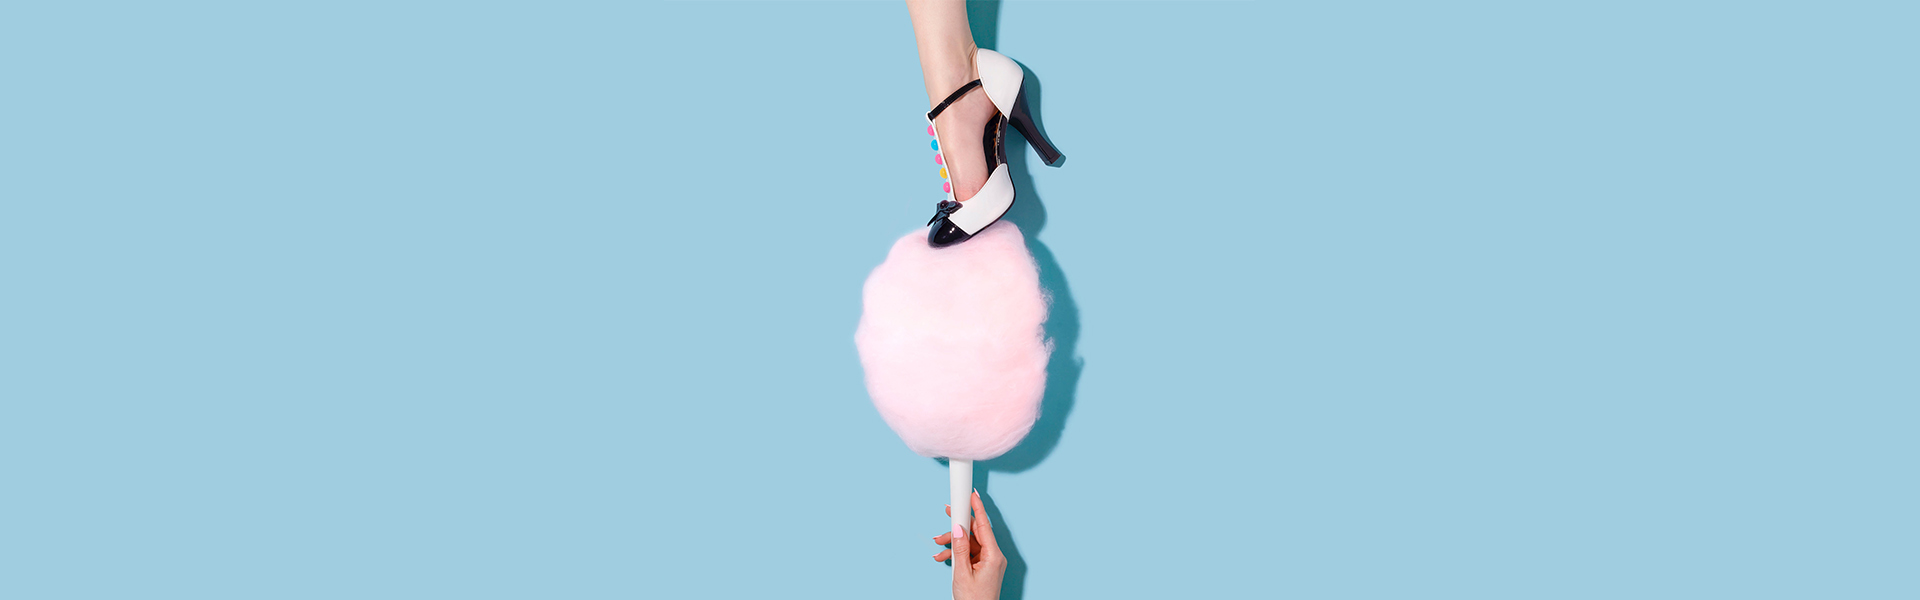 Woman's shoe stepping on pink fairy floss against blue background